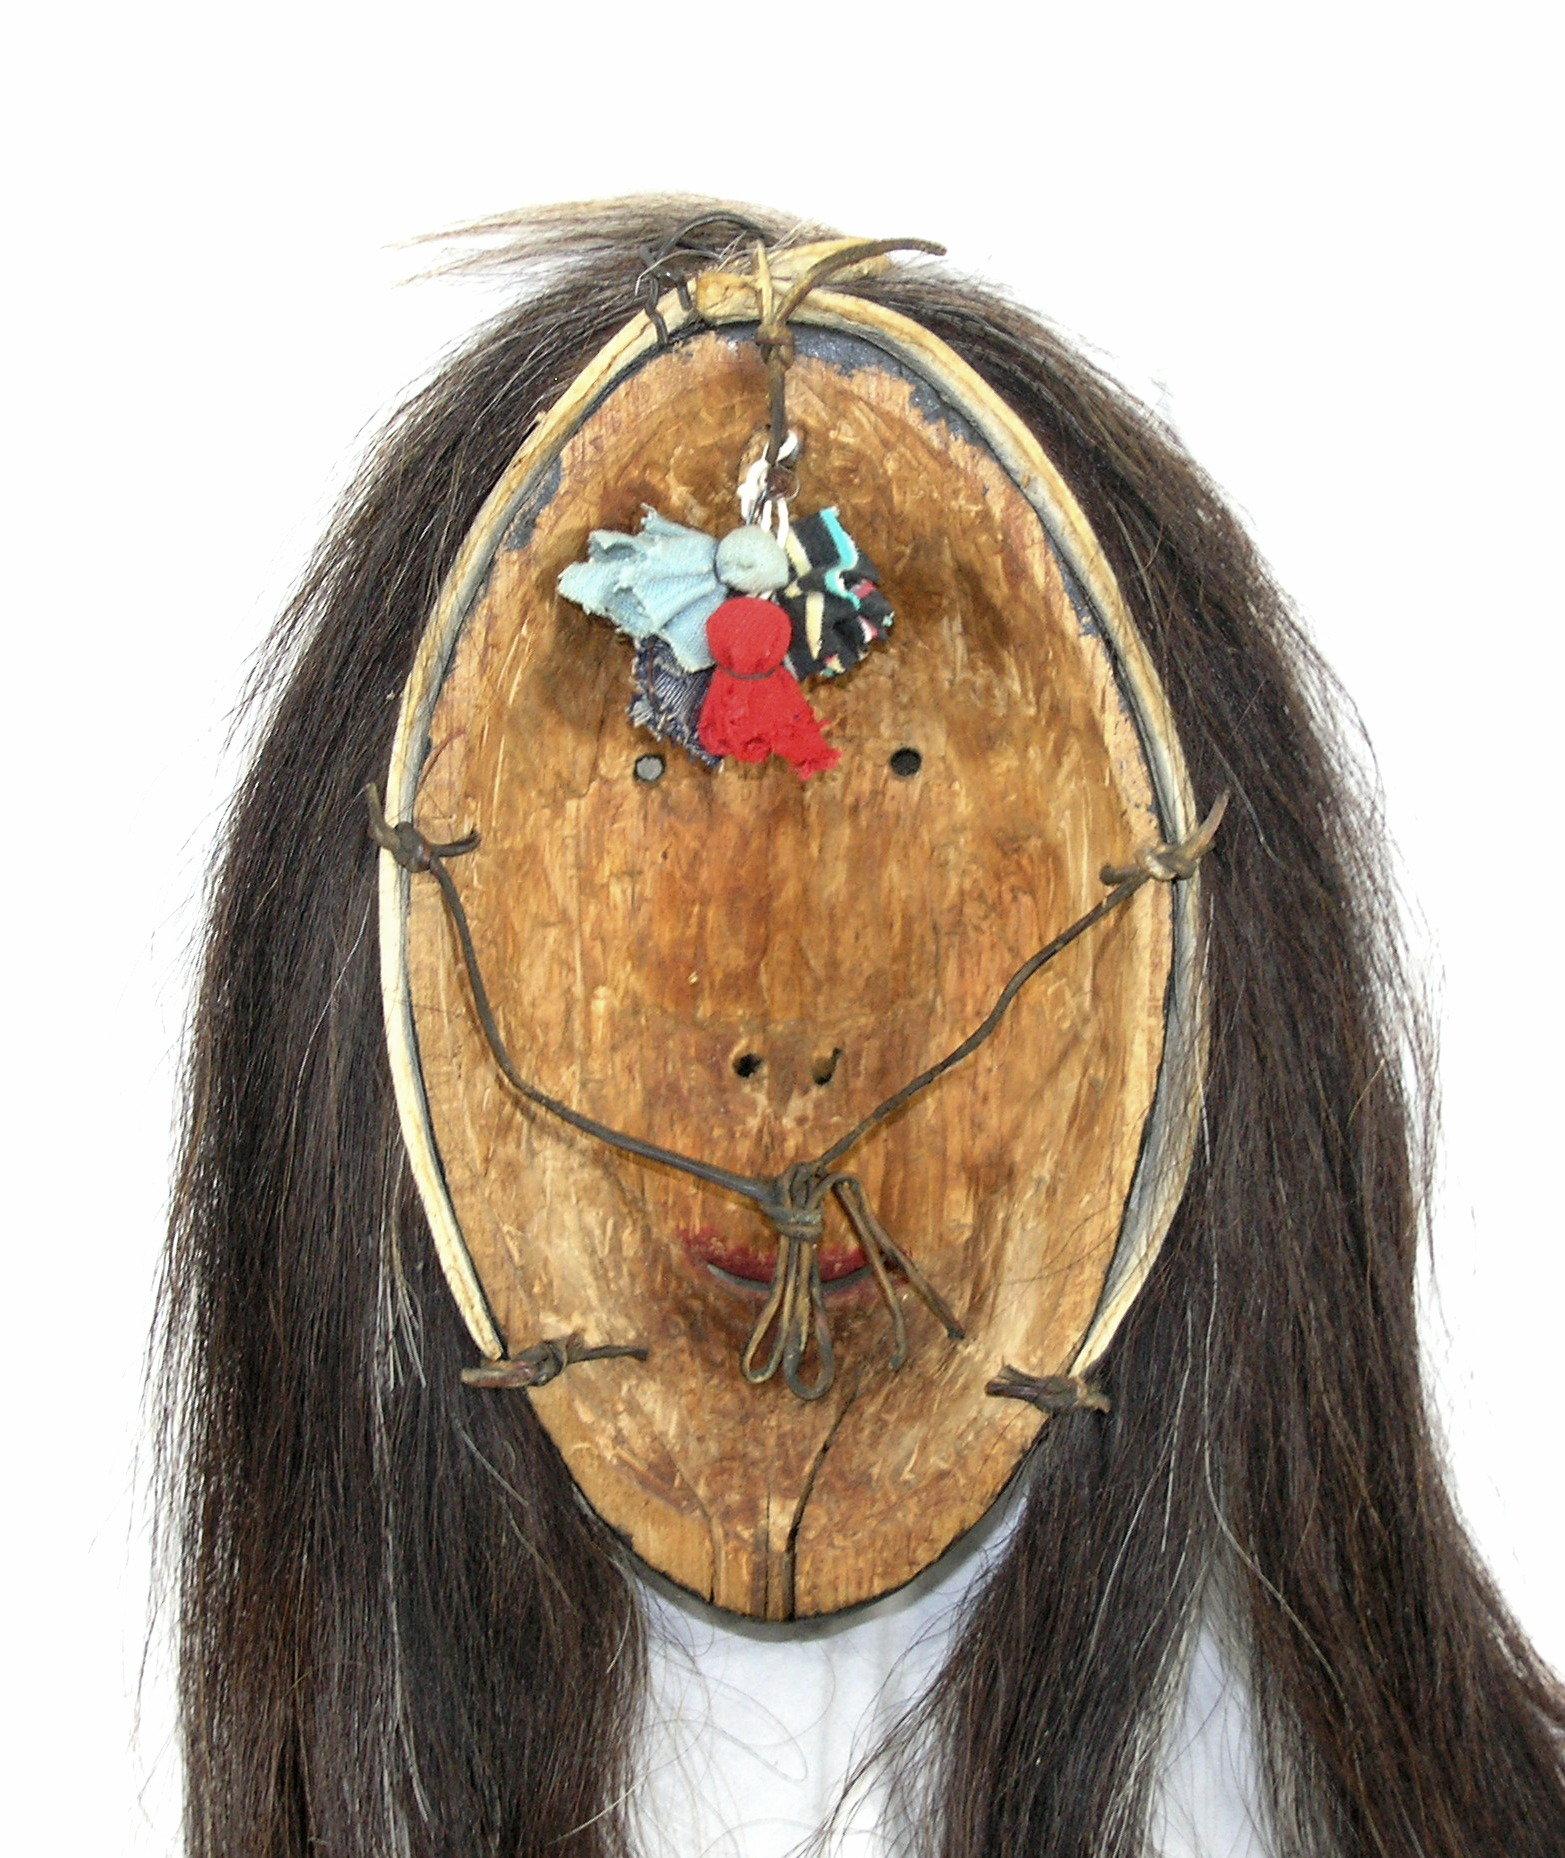 Vintage Iroquois False Face Mask including Tobbacco Pouches to Feed The Mas